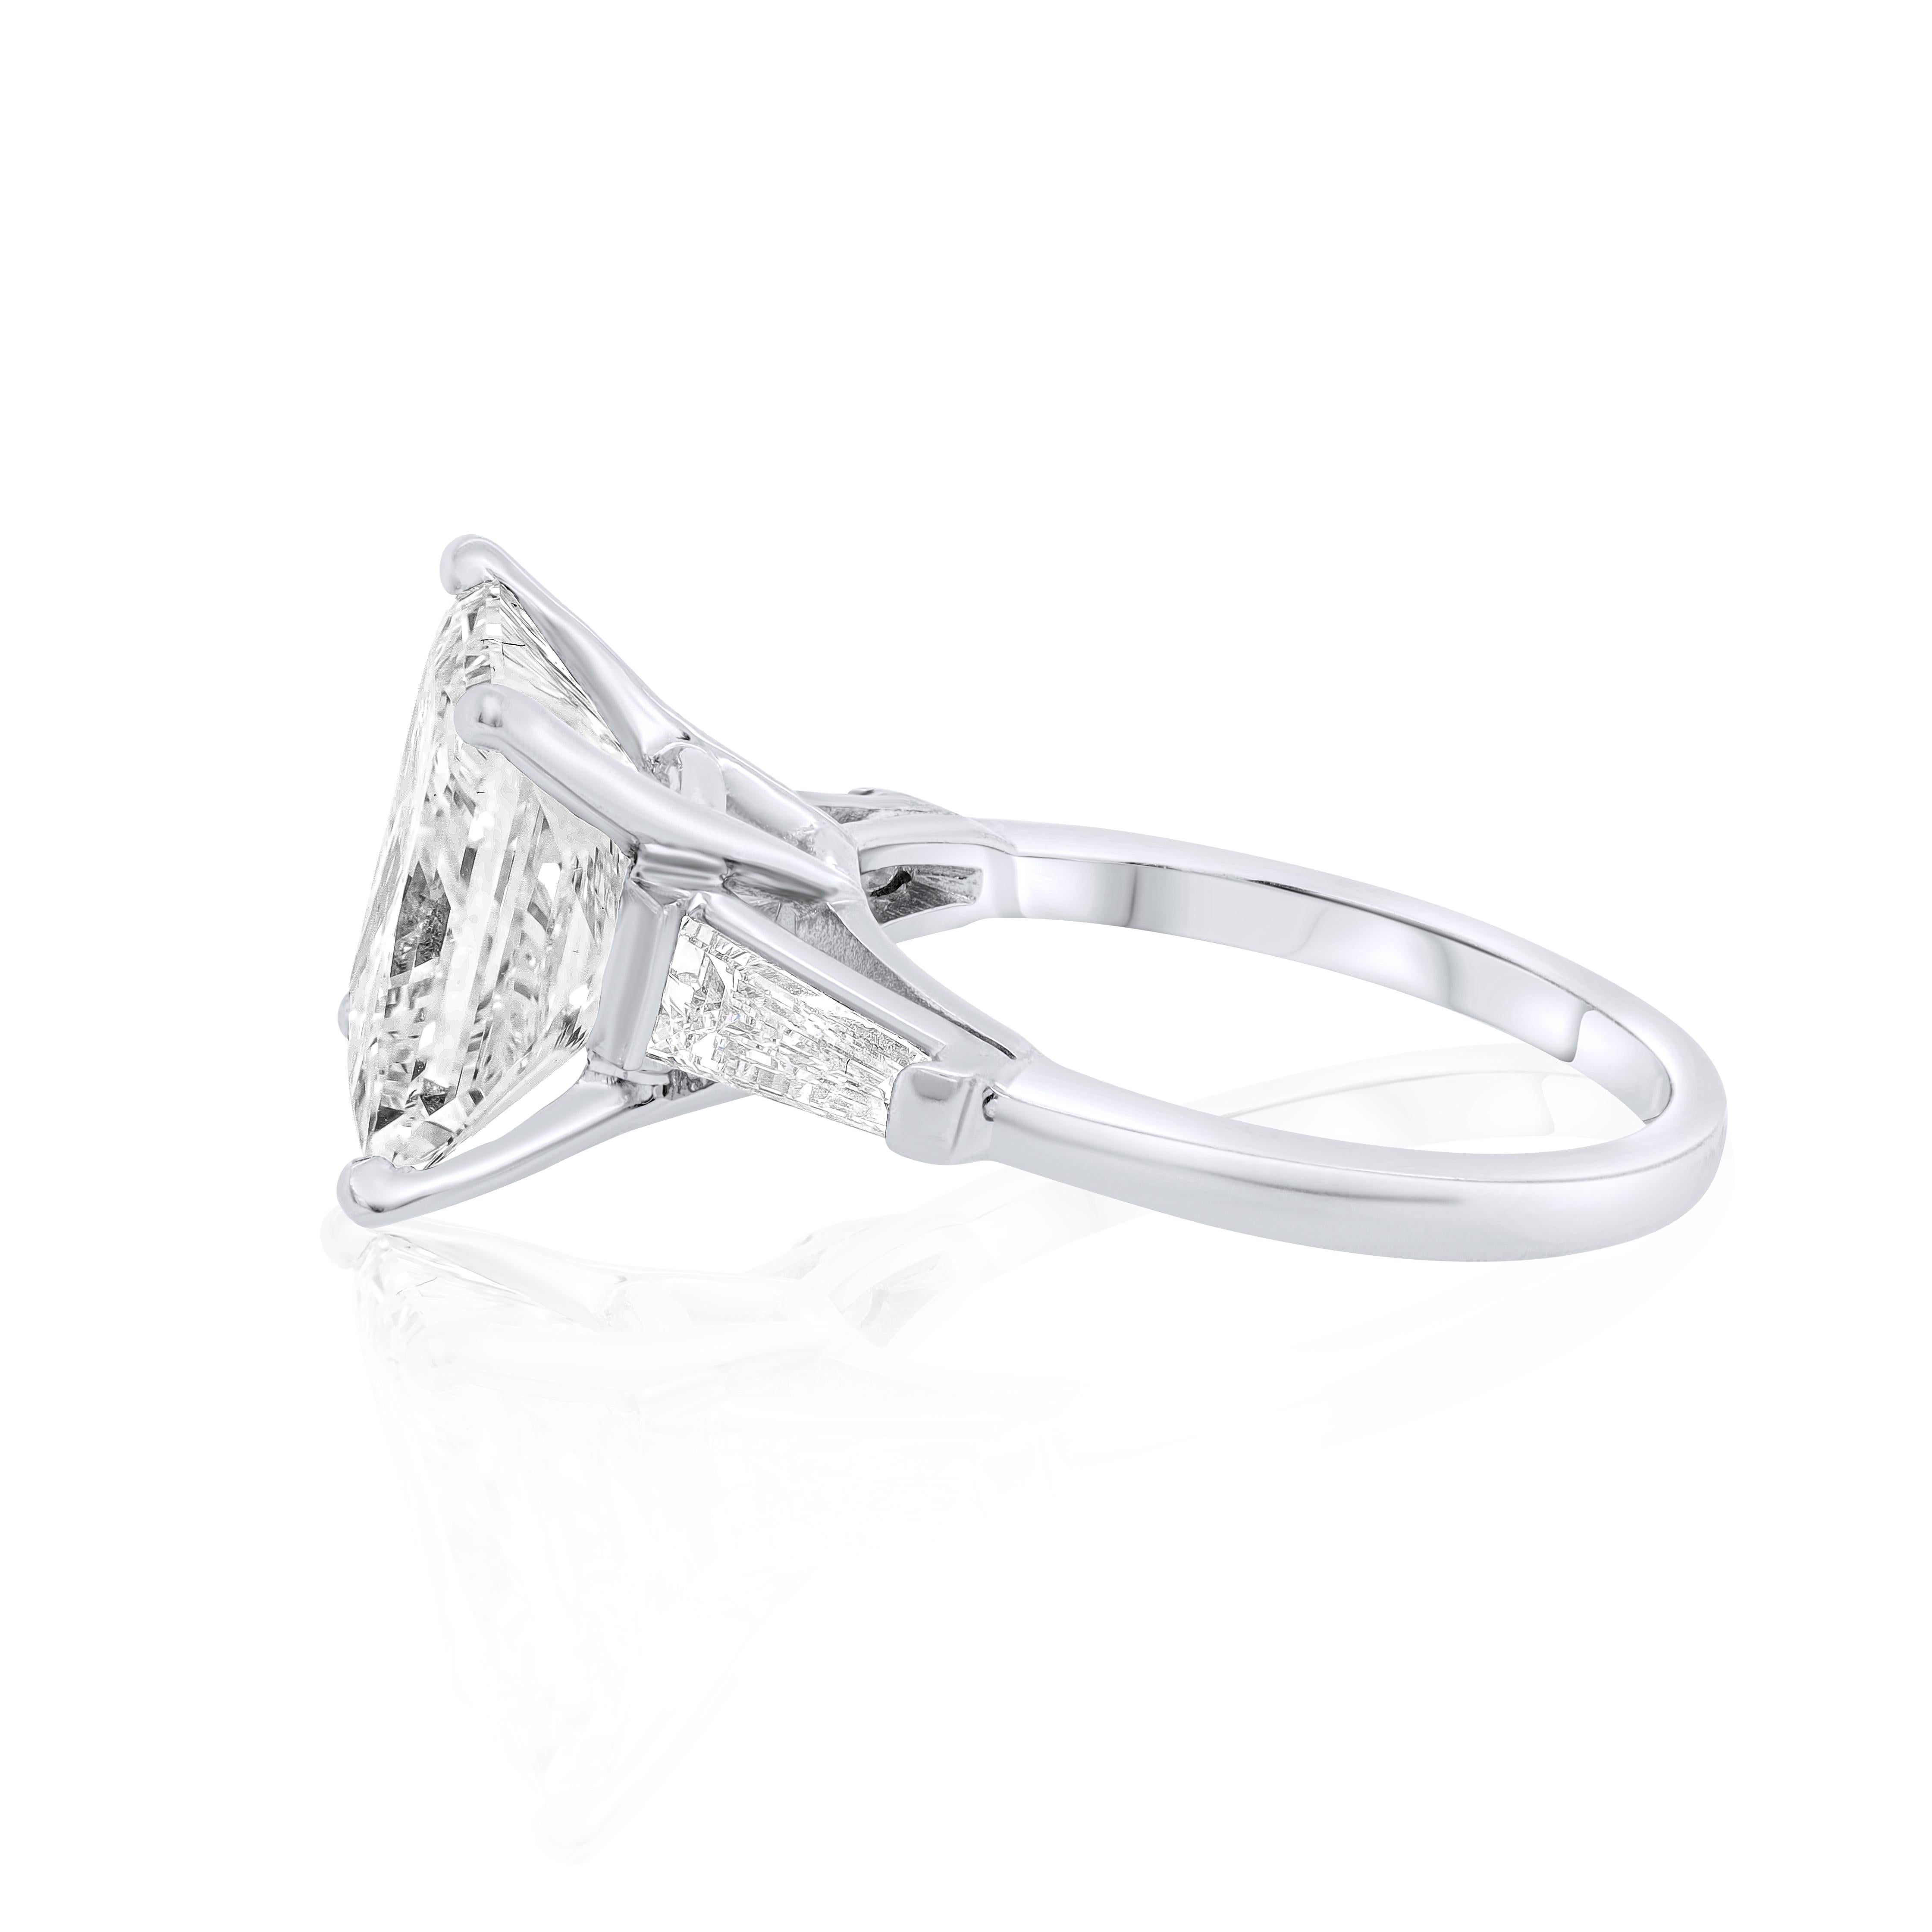 Platinum certified engagement ring with center diamond 4.30ct princess cut I-color VS1-Clarity GIA certified # 12220026 adorned with .60cts of baguettes
Diana M. is a leading supplier of top-quality fine jewelry for over 35 years.
Diana M is